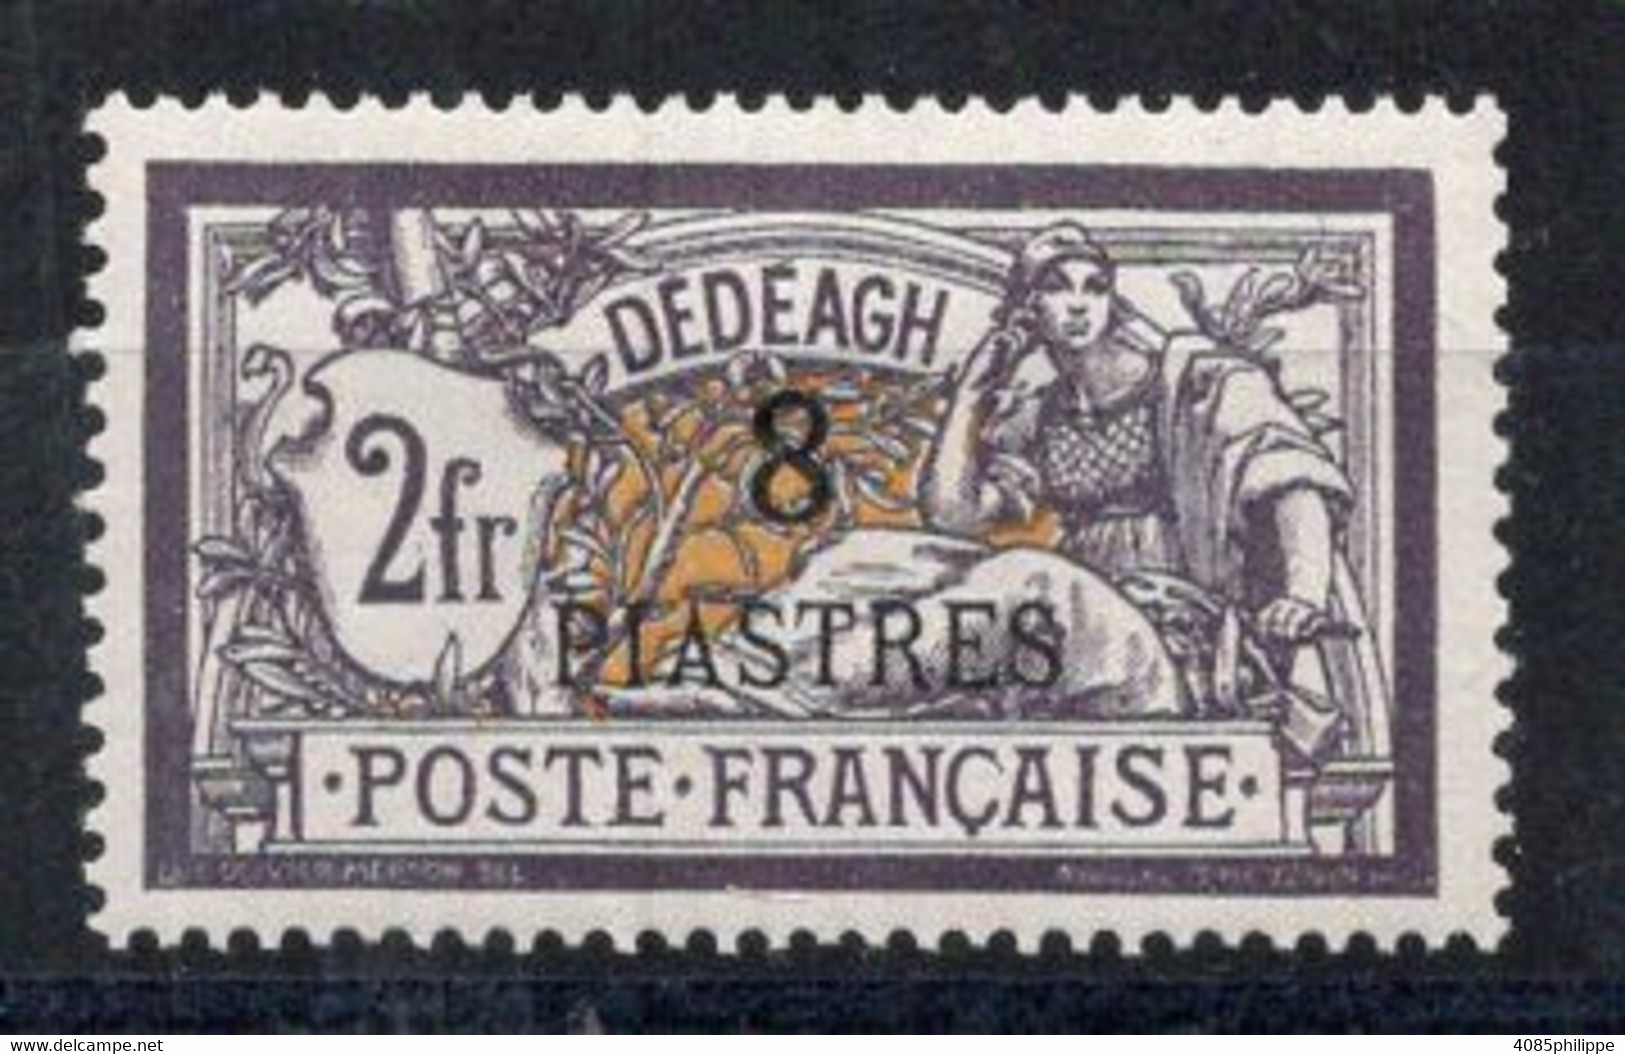 DEDEAGH Timbre Poste N°16* Neuf Charnière TB Cote : 35€00 - Unused Stamps